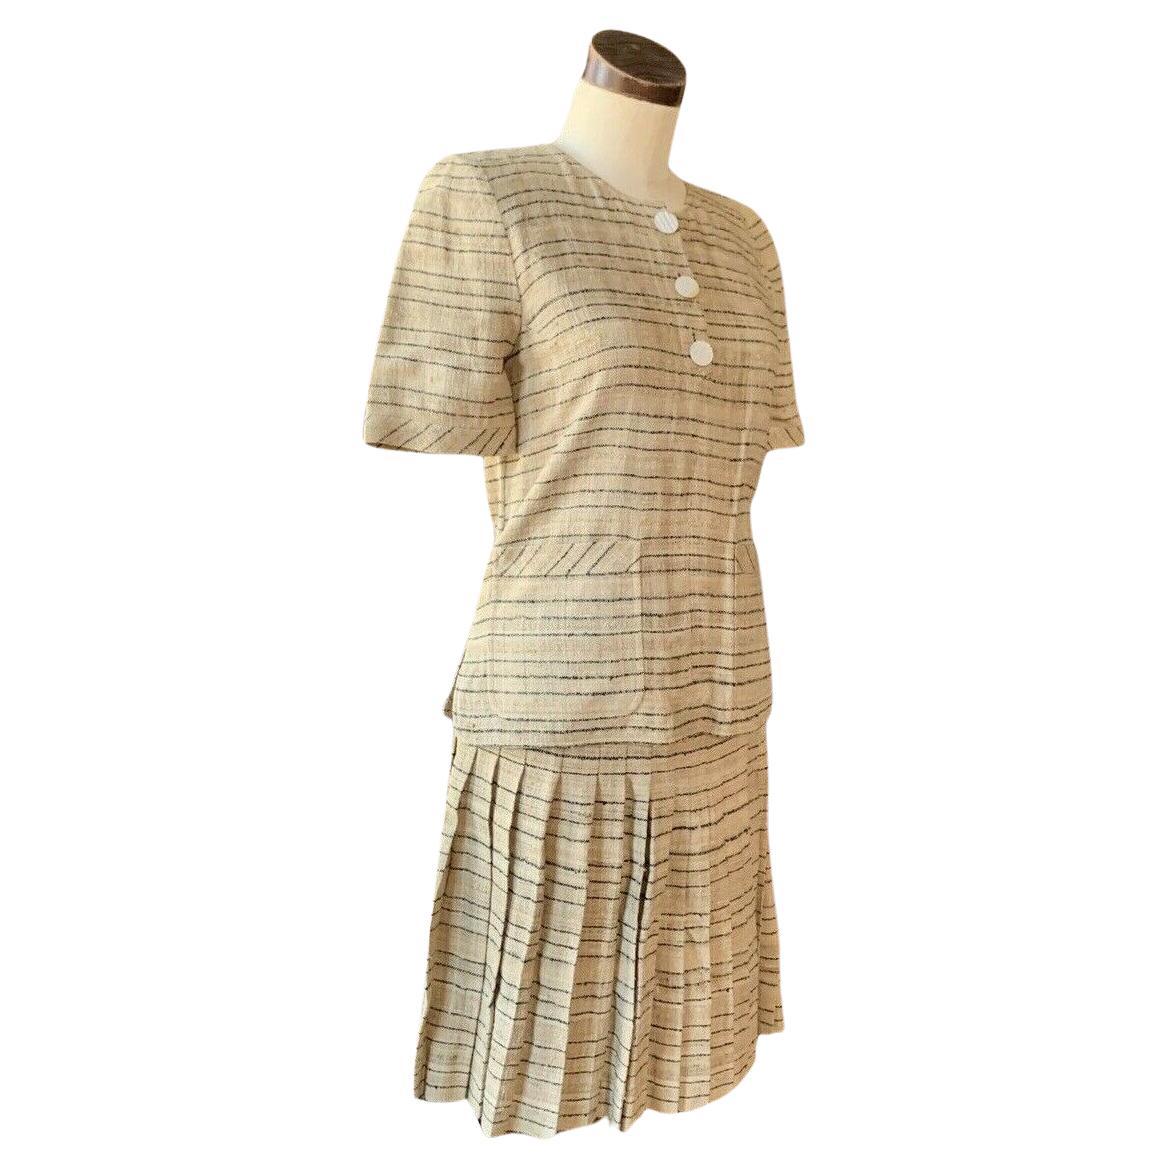 Valentino Boutique, Material: Cotton/Linen? The material feels like hemp, Pleated Skirt, Zipper on Both Pieces, Two Pockets on Top, Three Buttons on the Top
 
Measurements Laying Flat:
Top:
Bust- 16